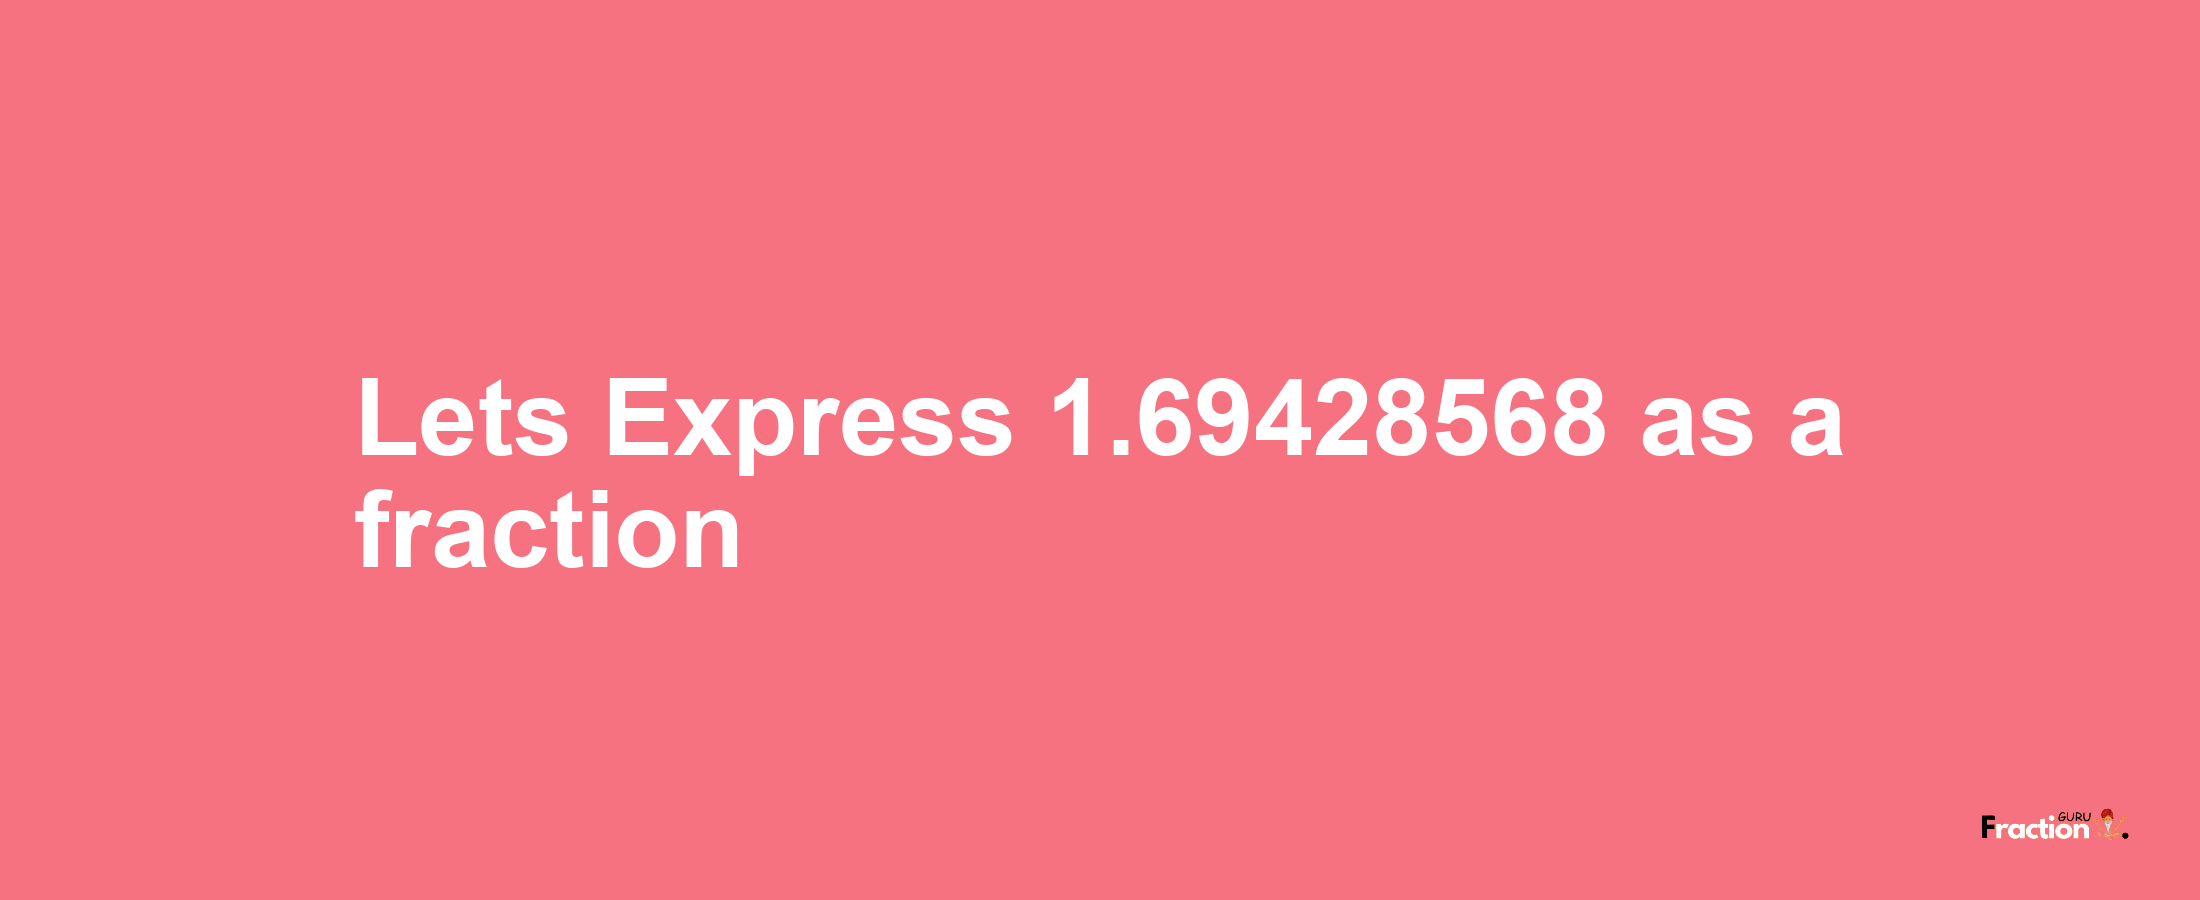 Lets Express 1.69428568 as afraction